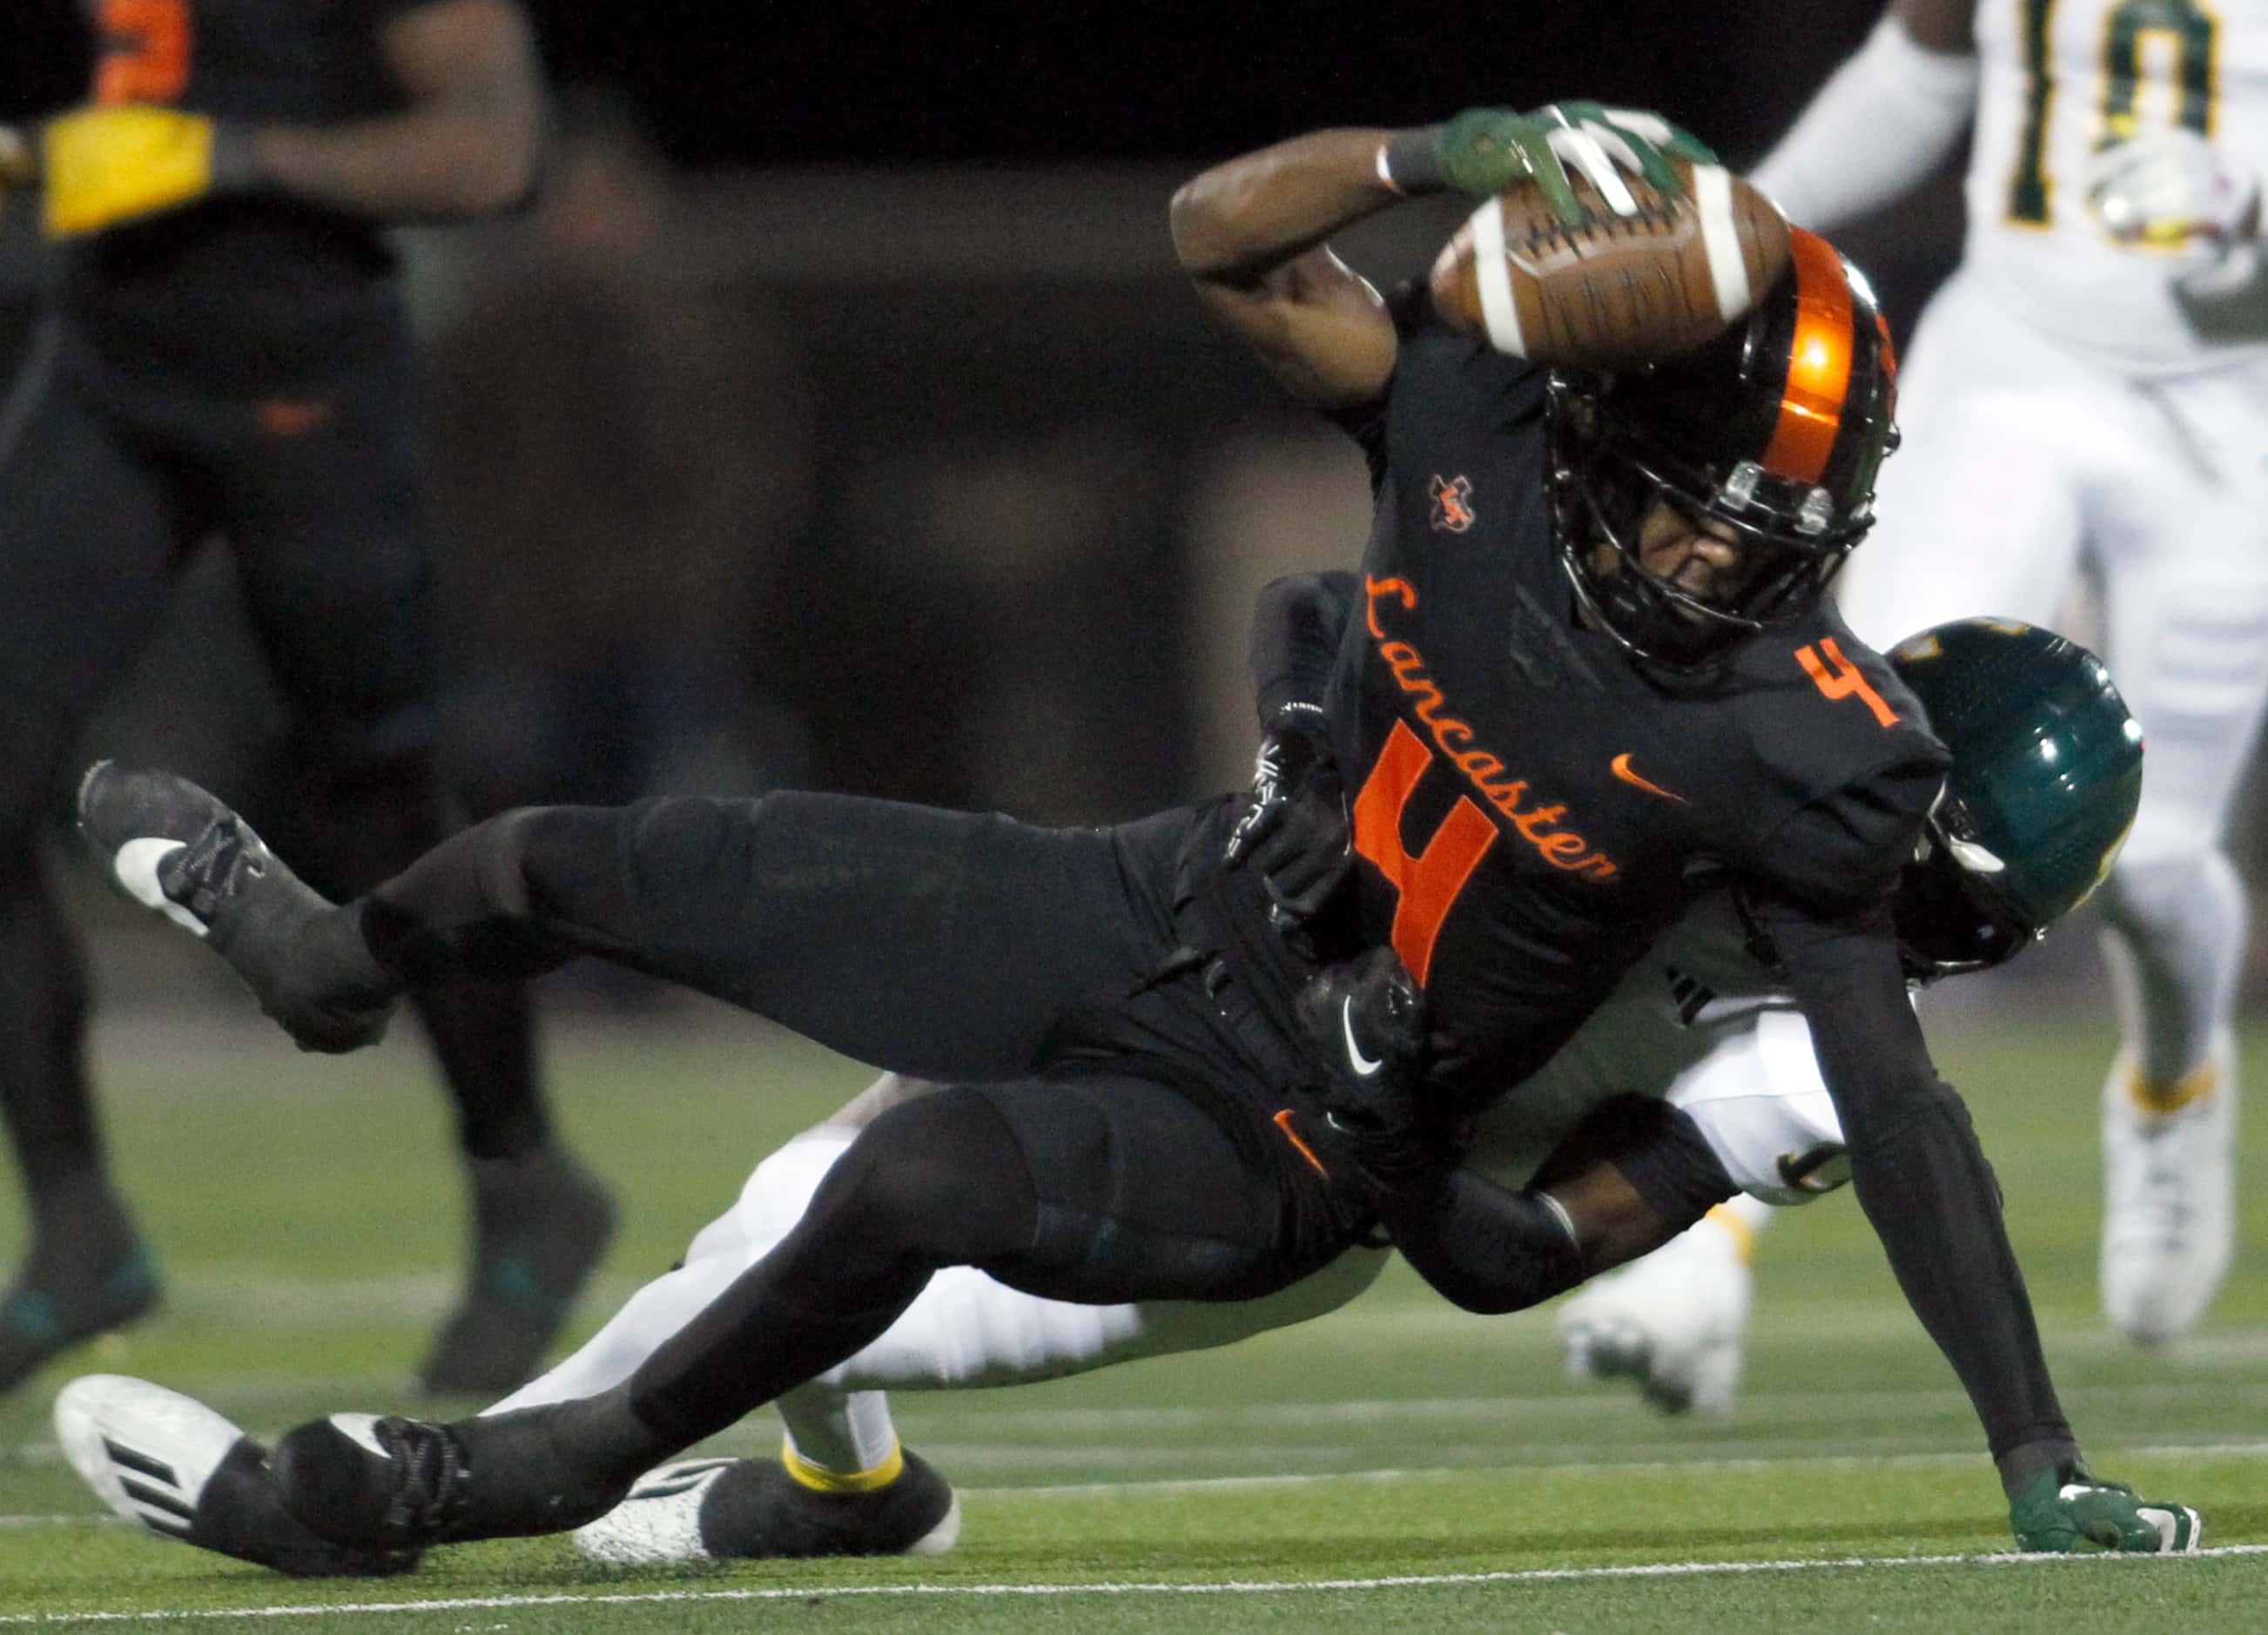 Lancaster receiver Emmanuel Choice (4) traps the ball against his helmet as he is tackled by...